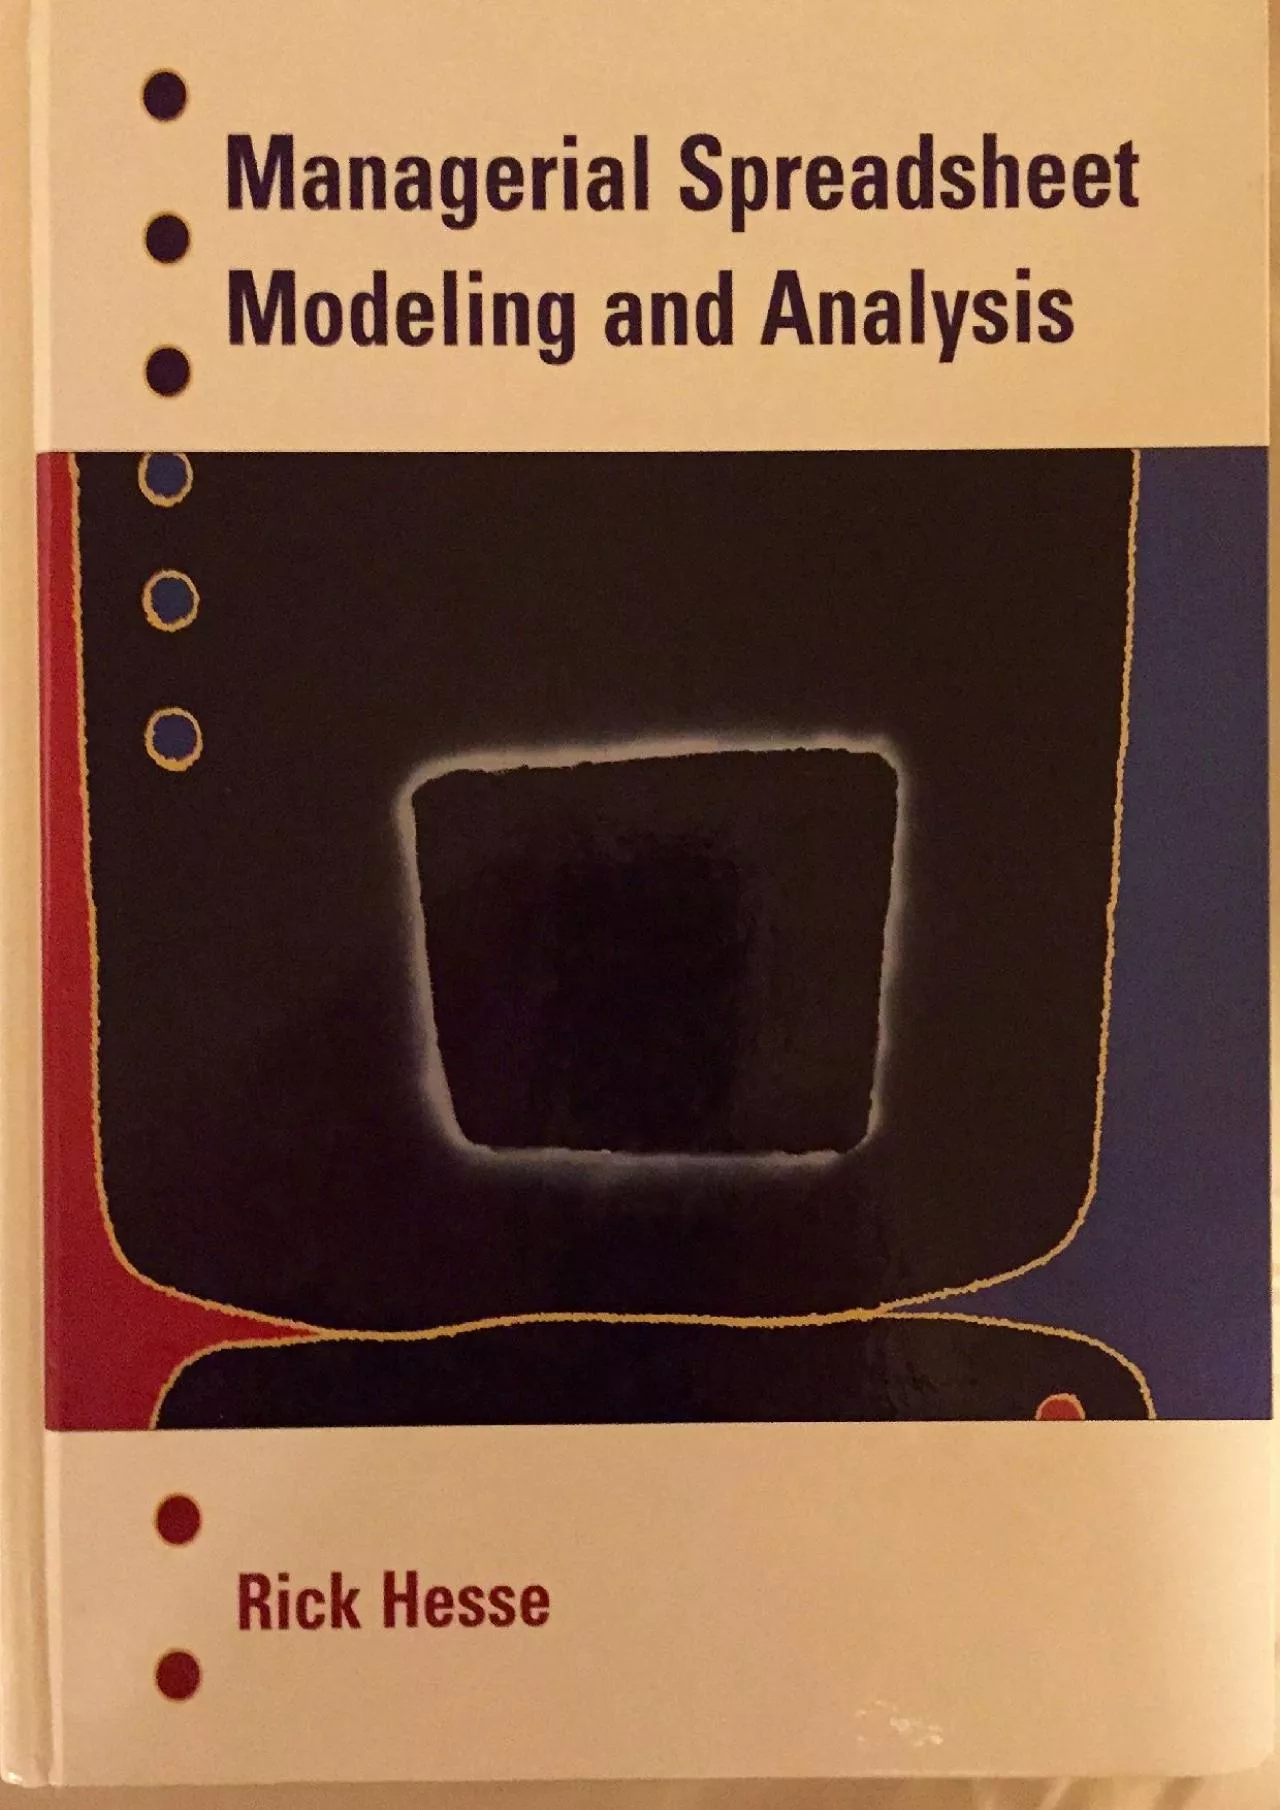 (DOWNLOAD)-Managerial Spreadsheet Modeling and Analysis (Irwin Series in Quantitative